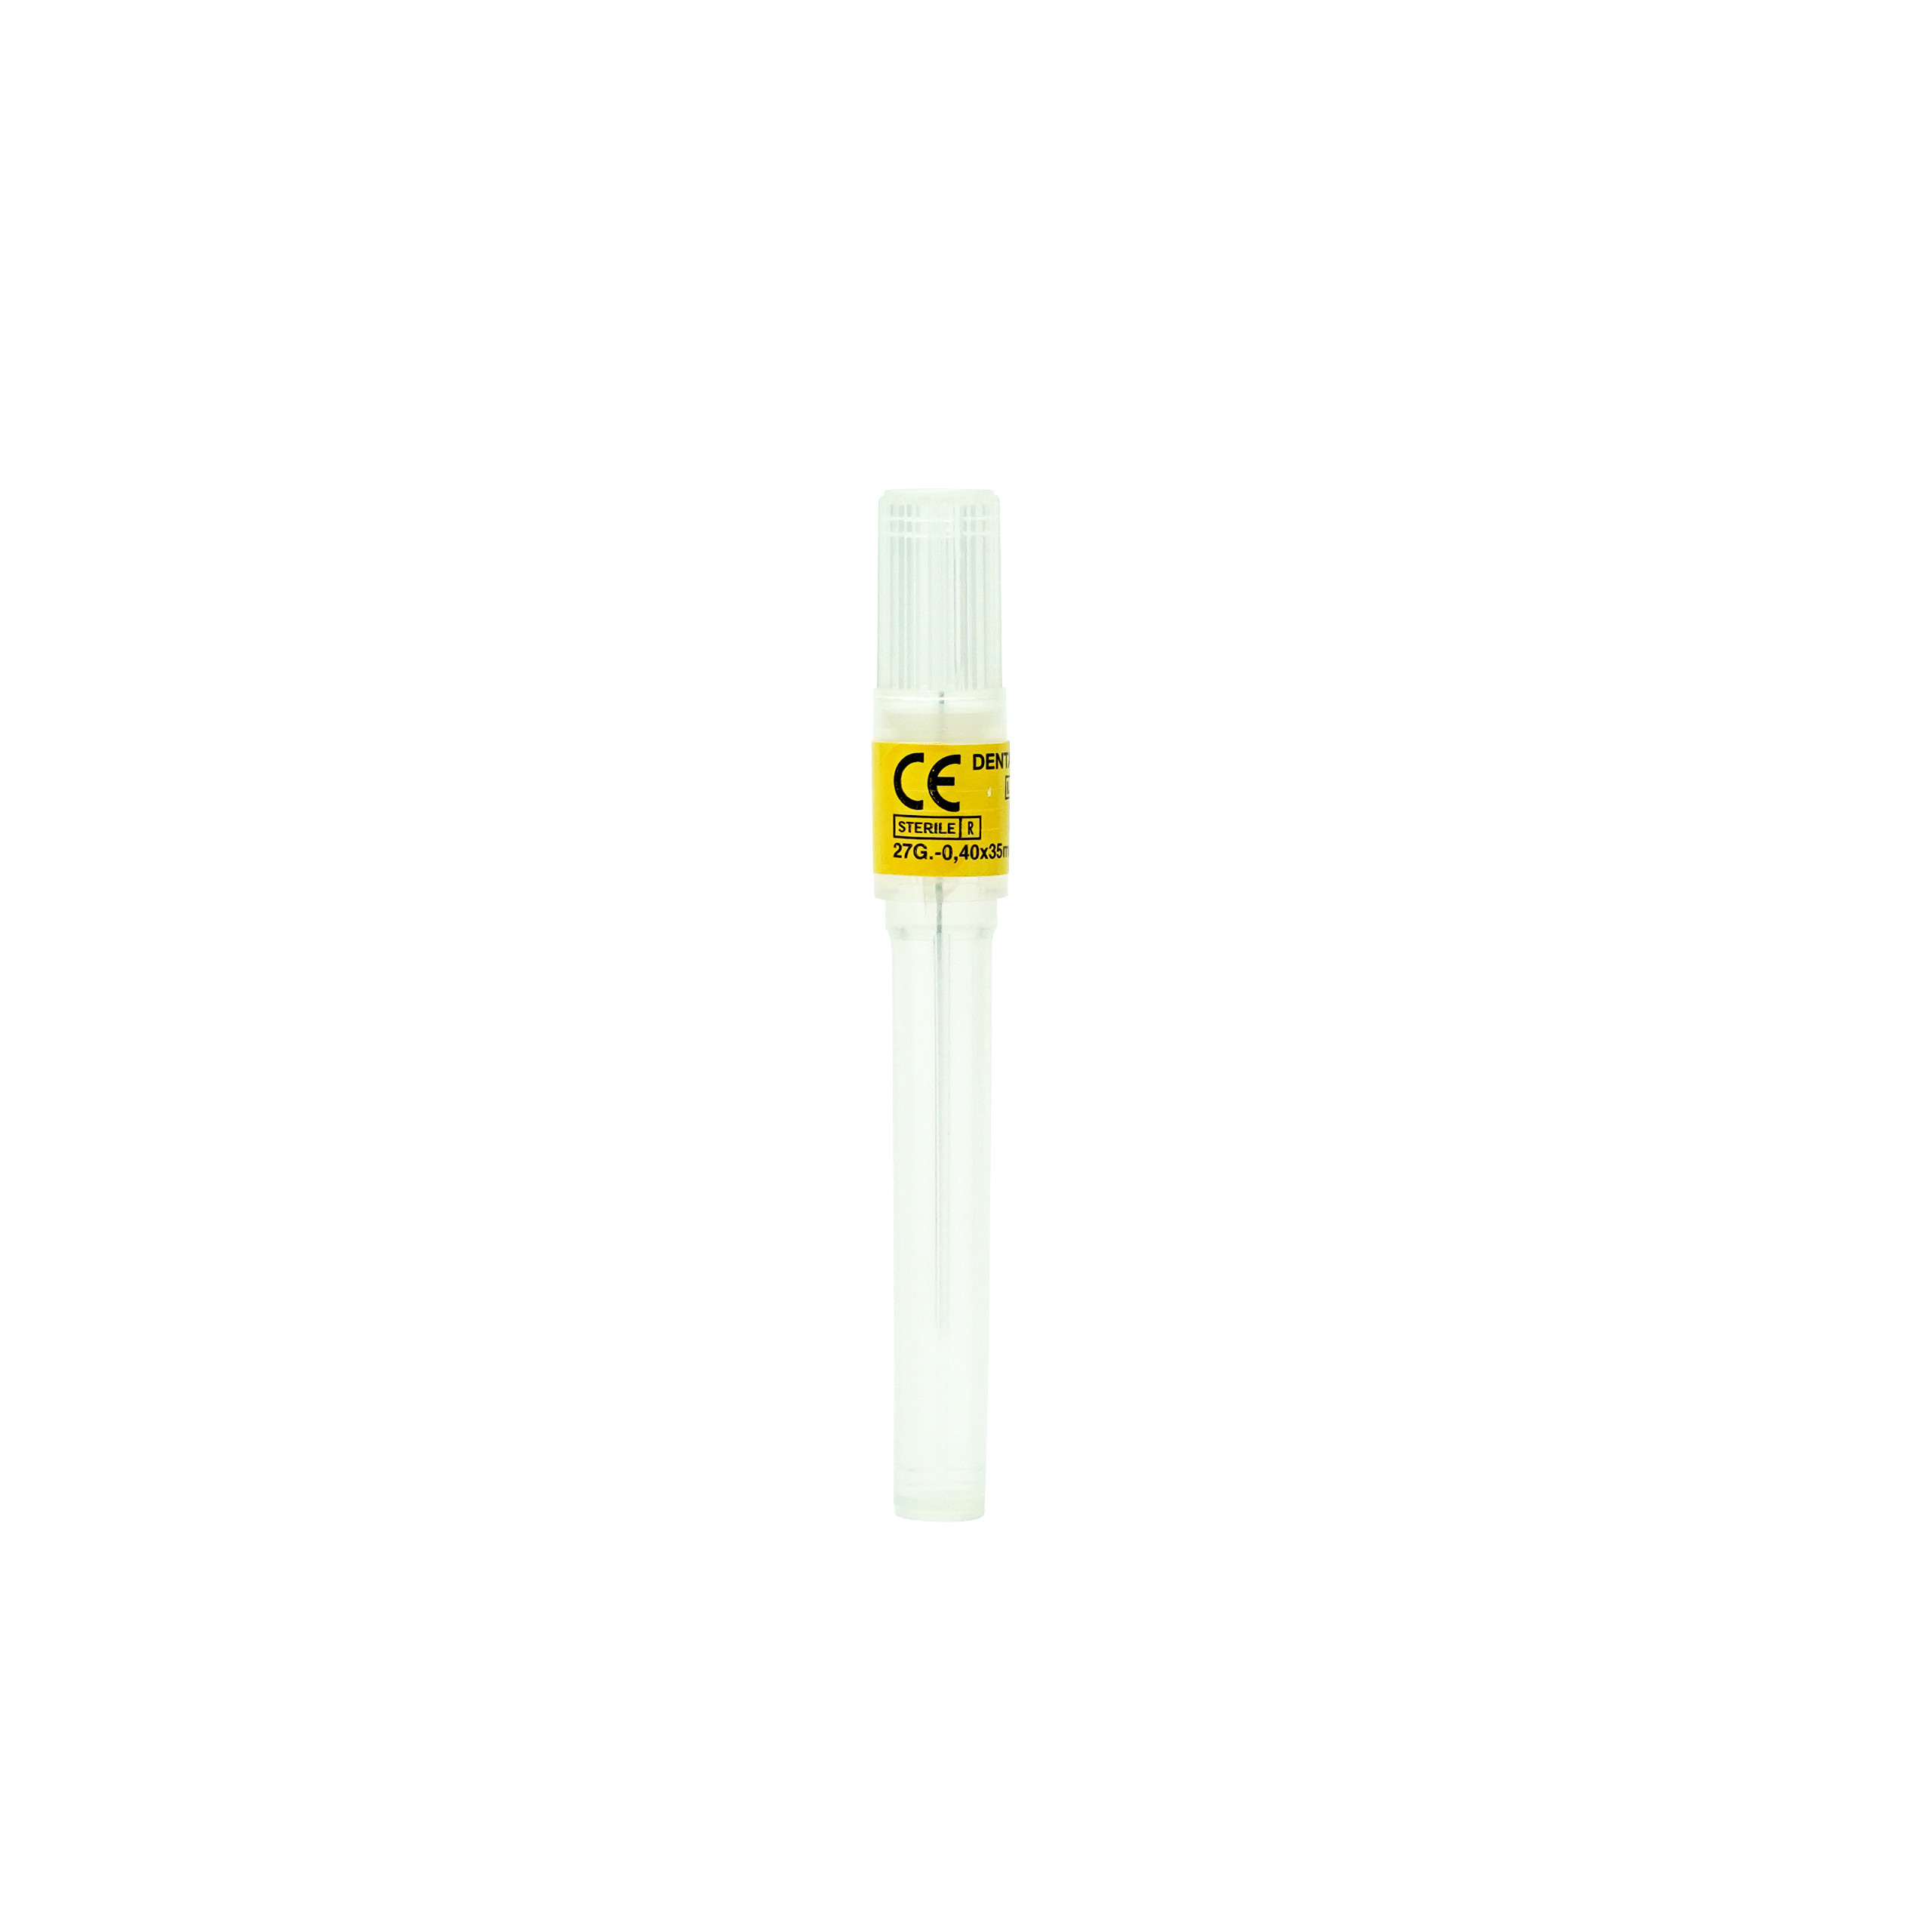 Septodont Septoject Needle For Cartridge 27g X 40 X35mm Yellow